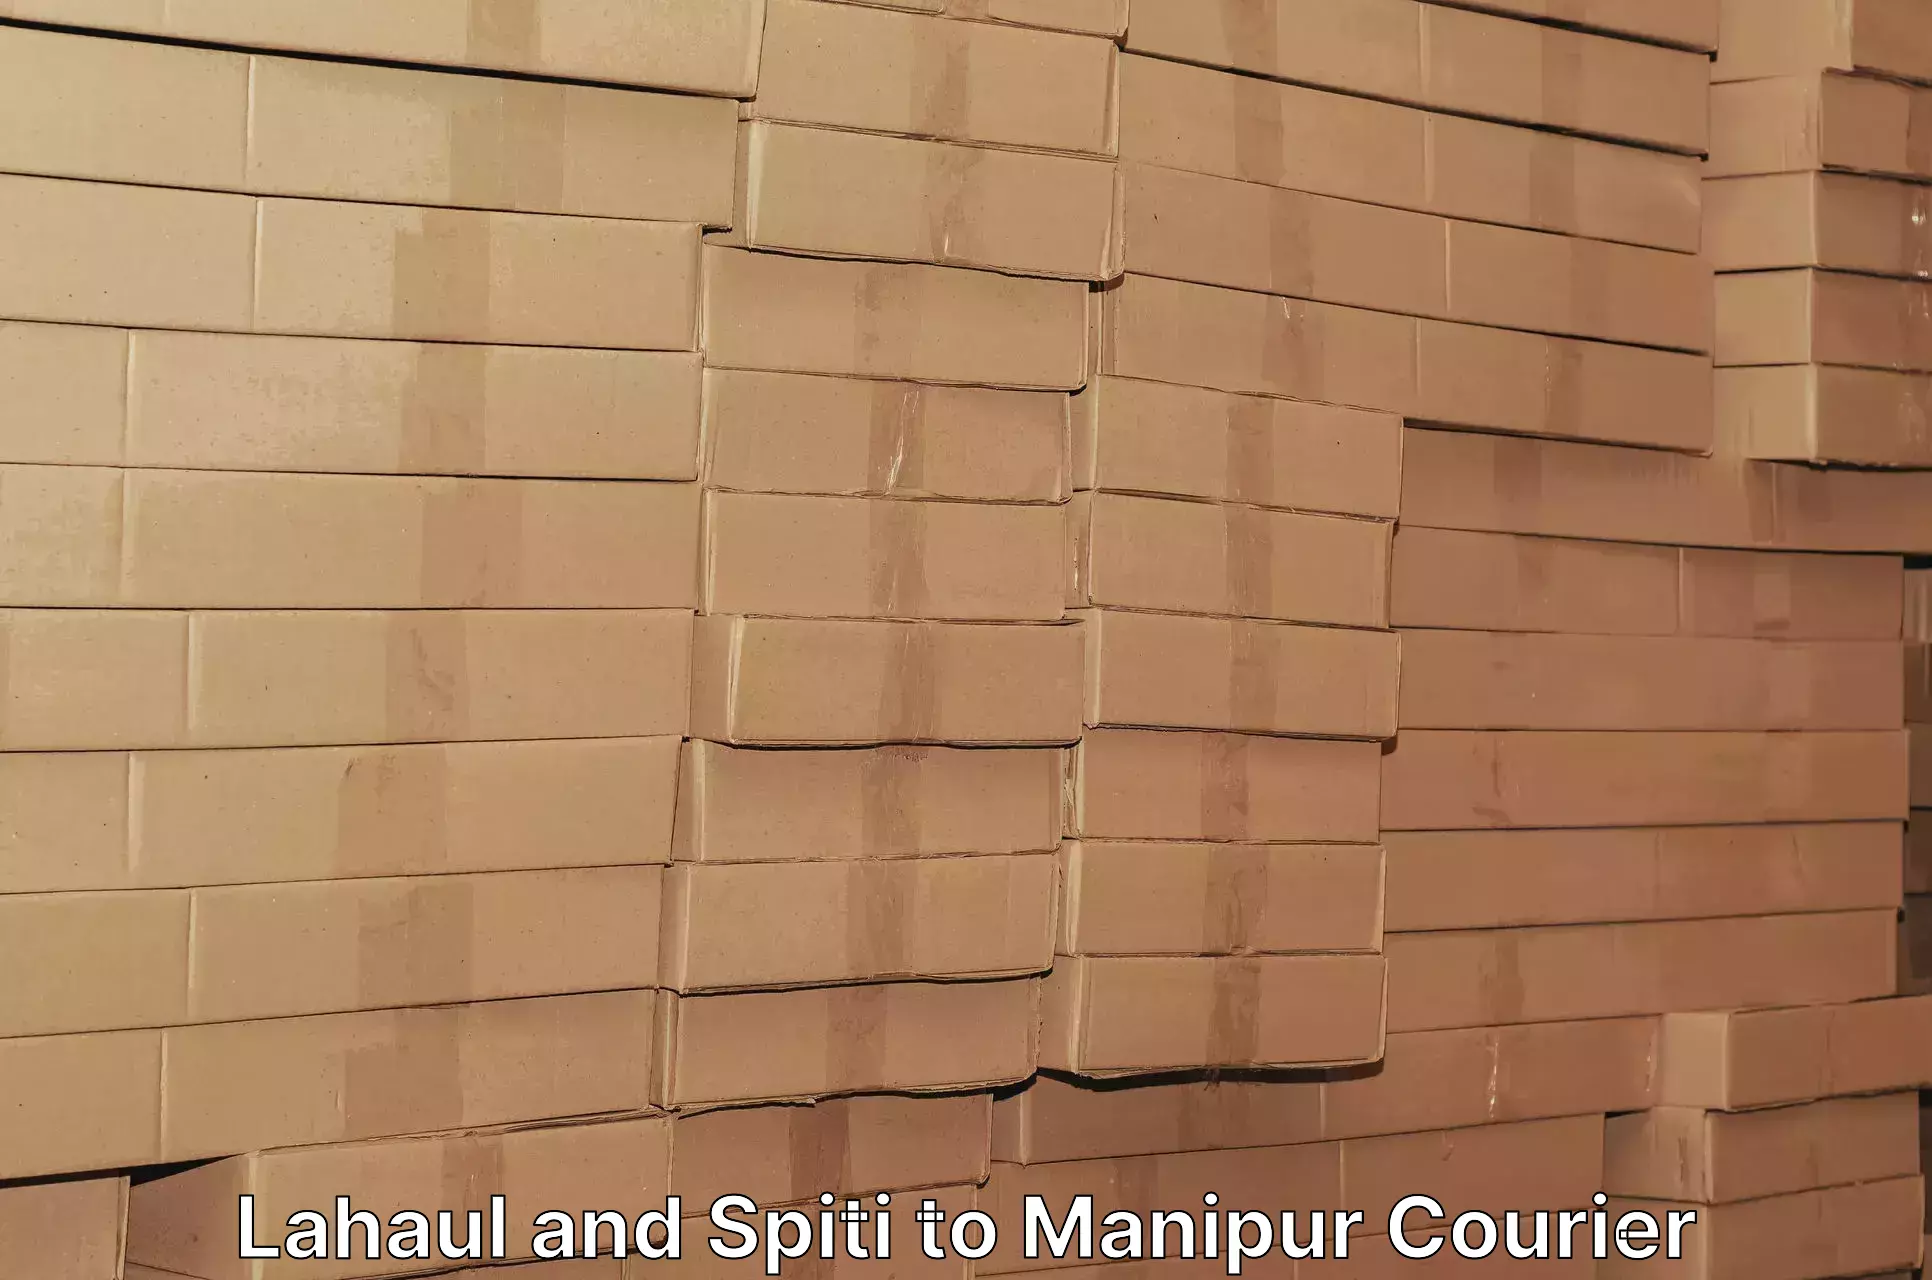 Small business couriers Lahaul and Spiti to Manipur